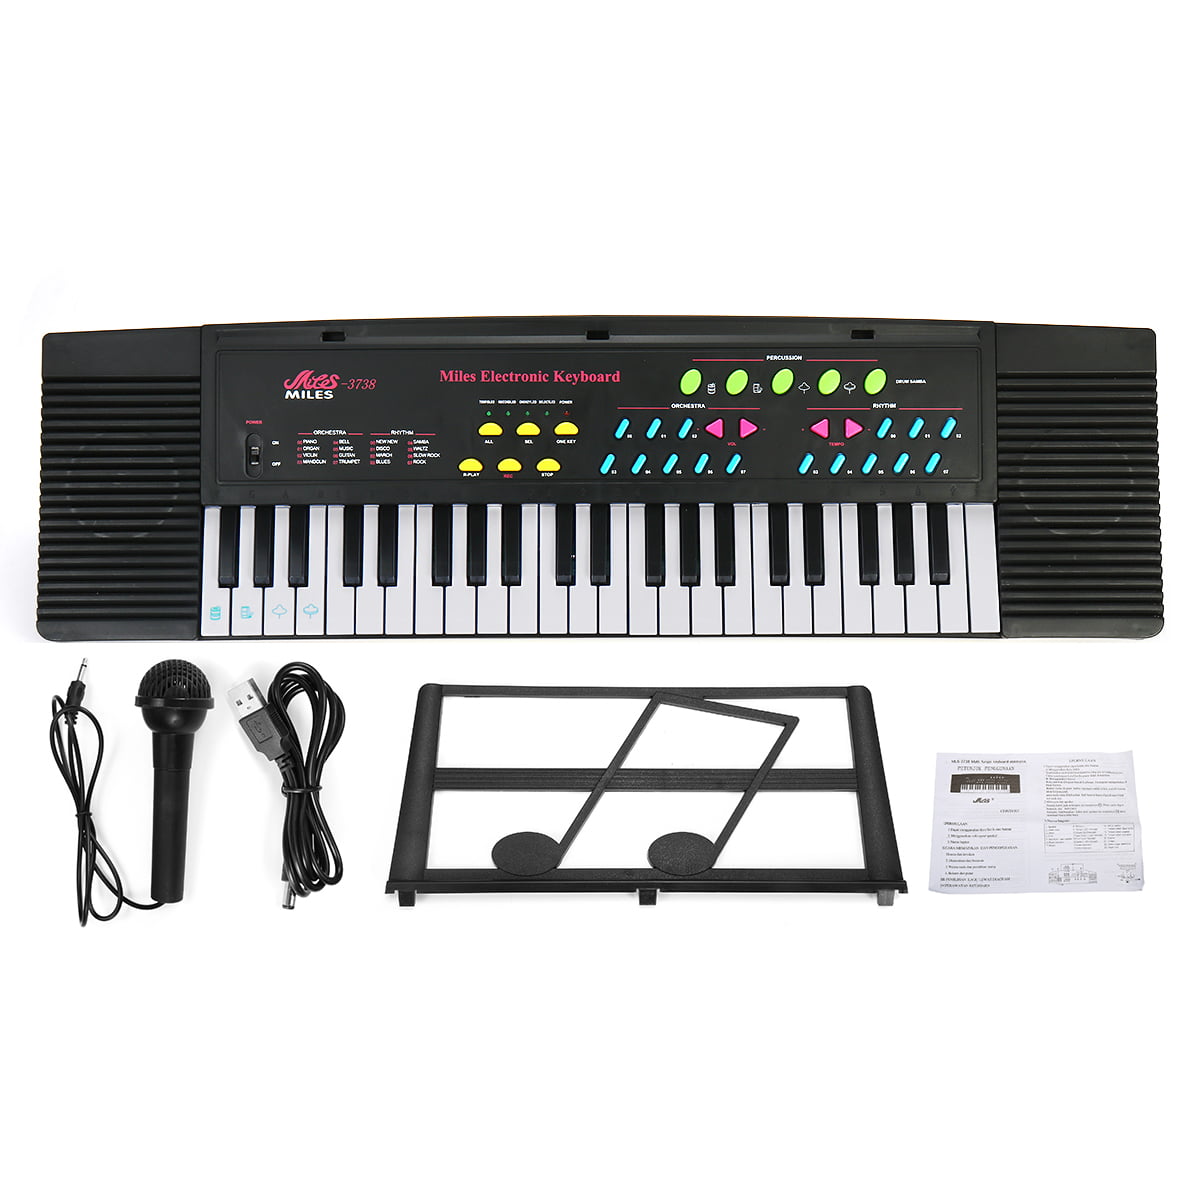 Piano Keyboard Music Digital Piano Electric Keyboards for kids Musical Instrument USB multi-function w/Microphone Weighted keys Birthday Christmas Festival Gift for children GIVISION